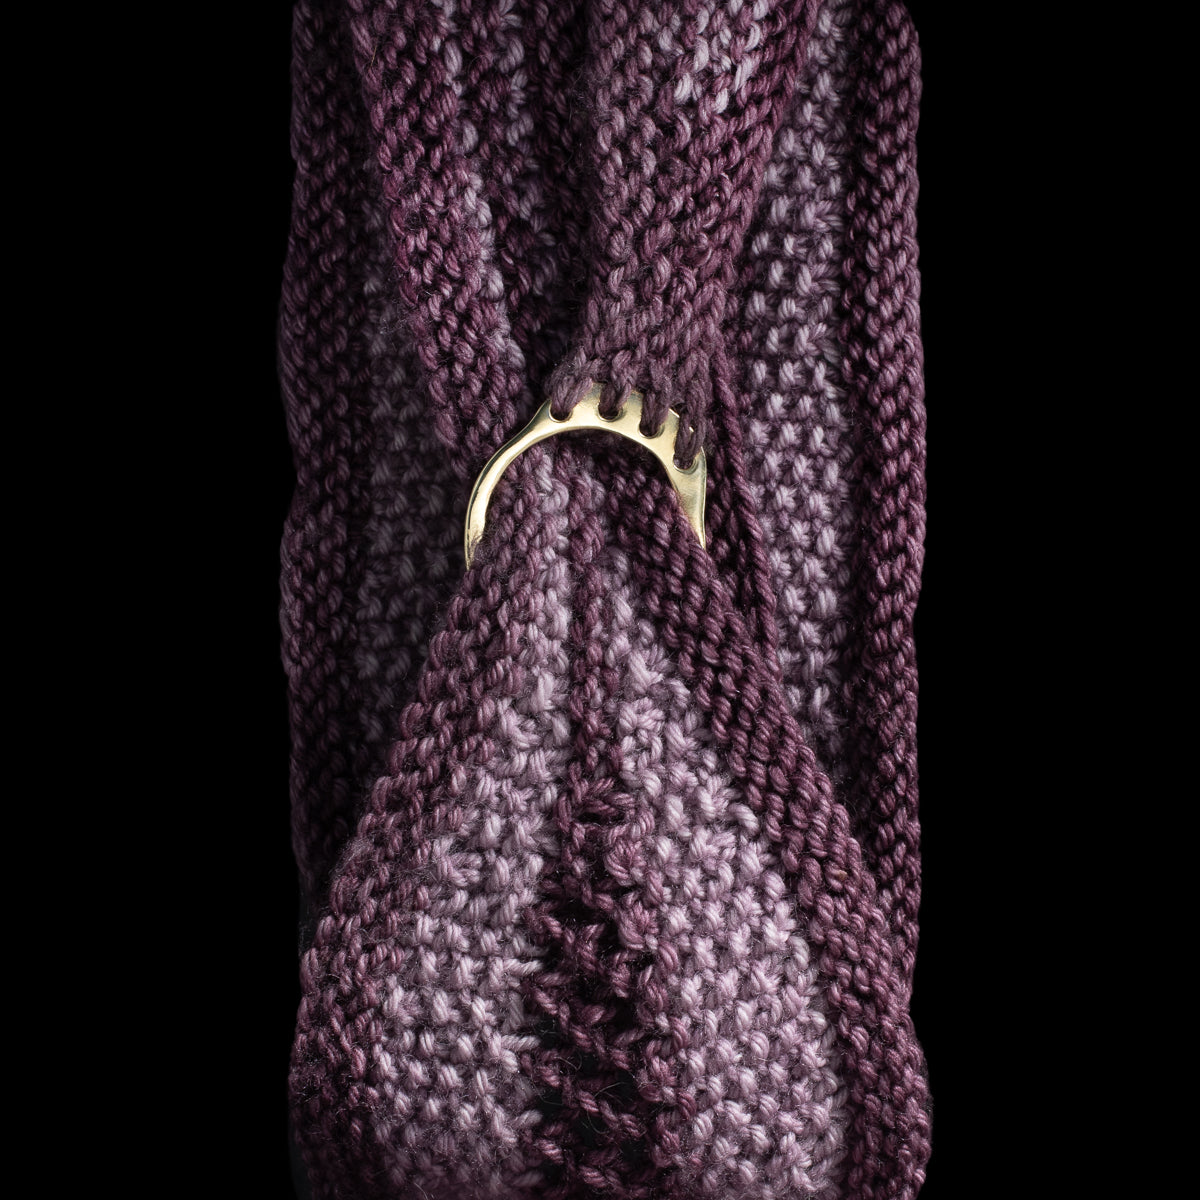 Porterness Studio Bronze Hand Craved Shawl Ring Luxury Knitting Jewelry for the Contemporary Yarn Connoisseur